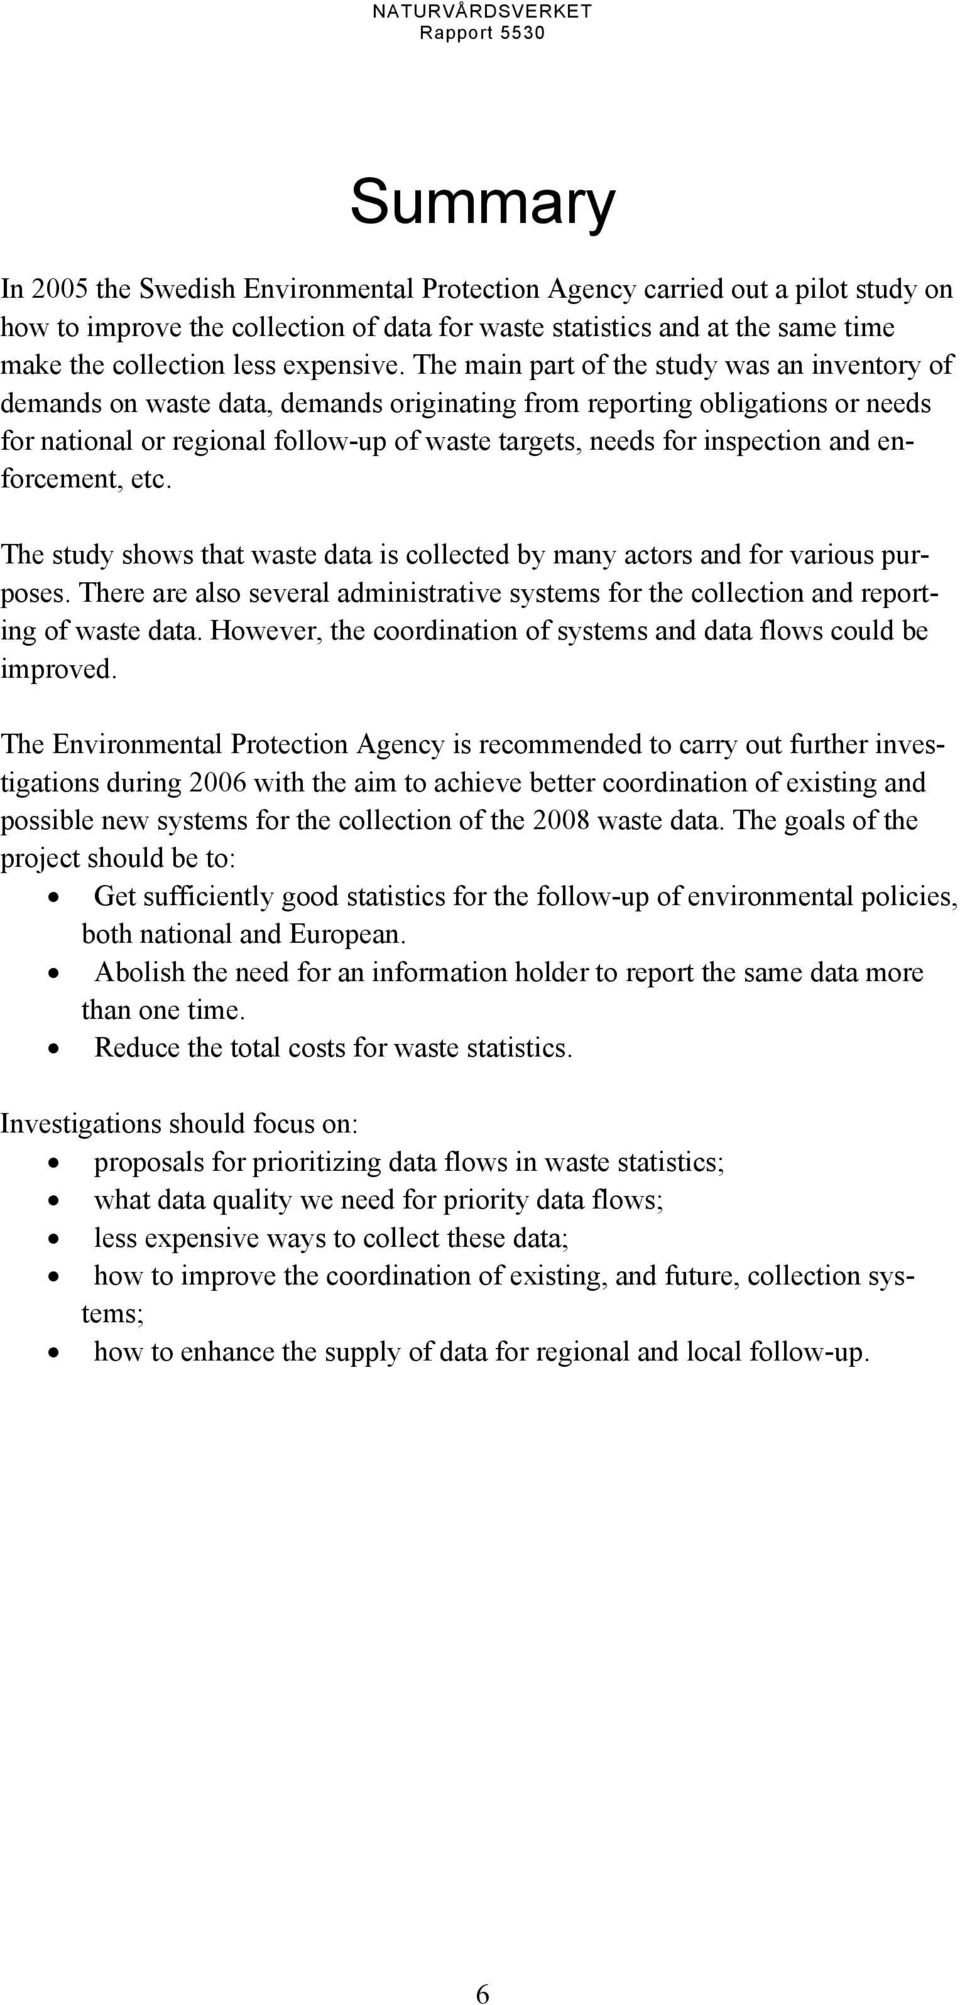 The main part of the study was an inventory of demands on waste data, demands originating from reporting obligations or needs for national or regional follow-up of waste targets, needs for inspection